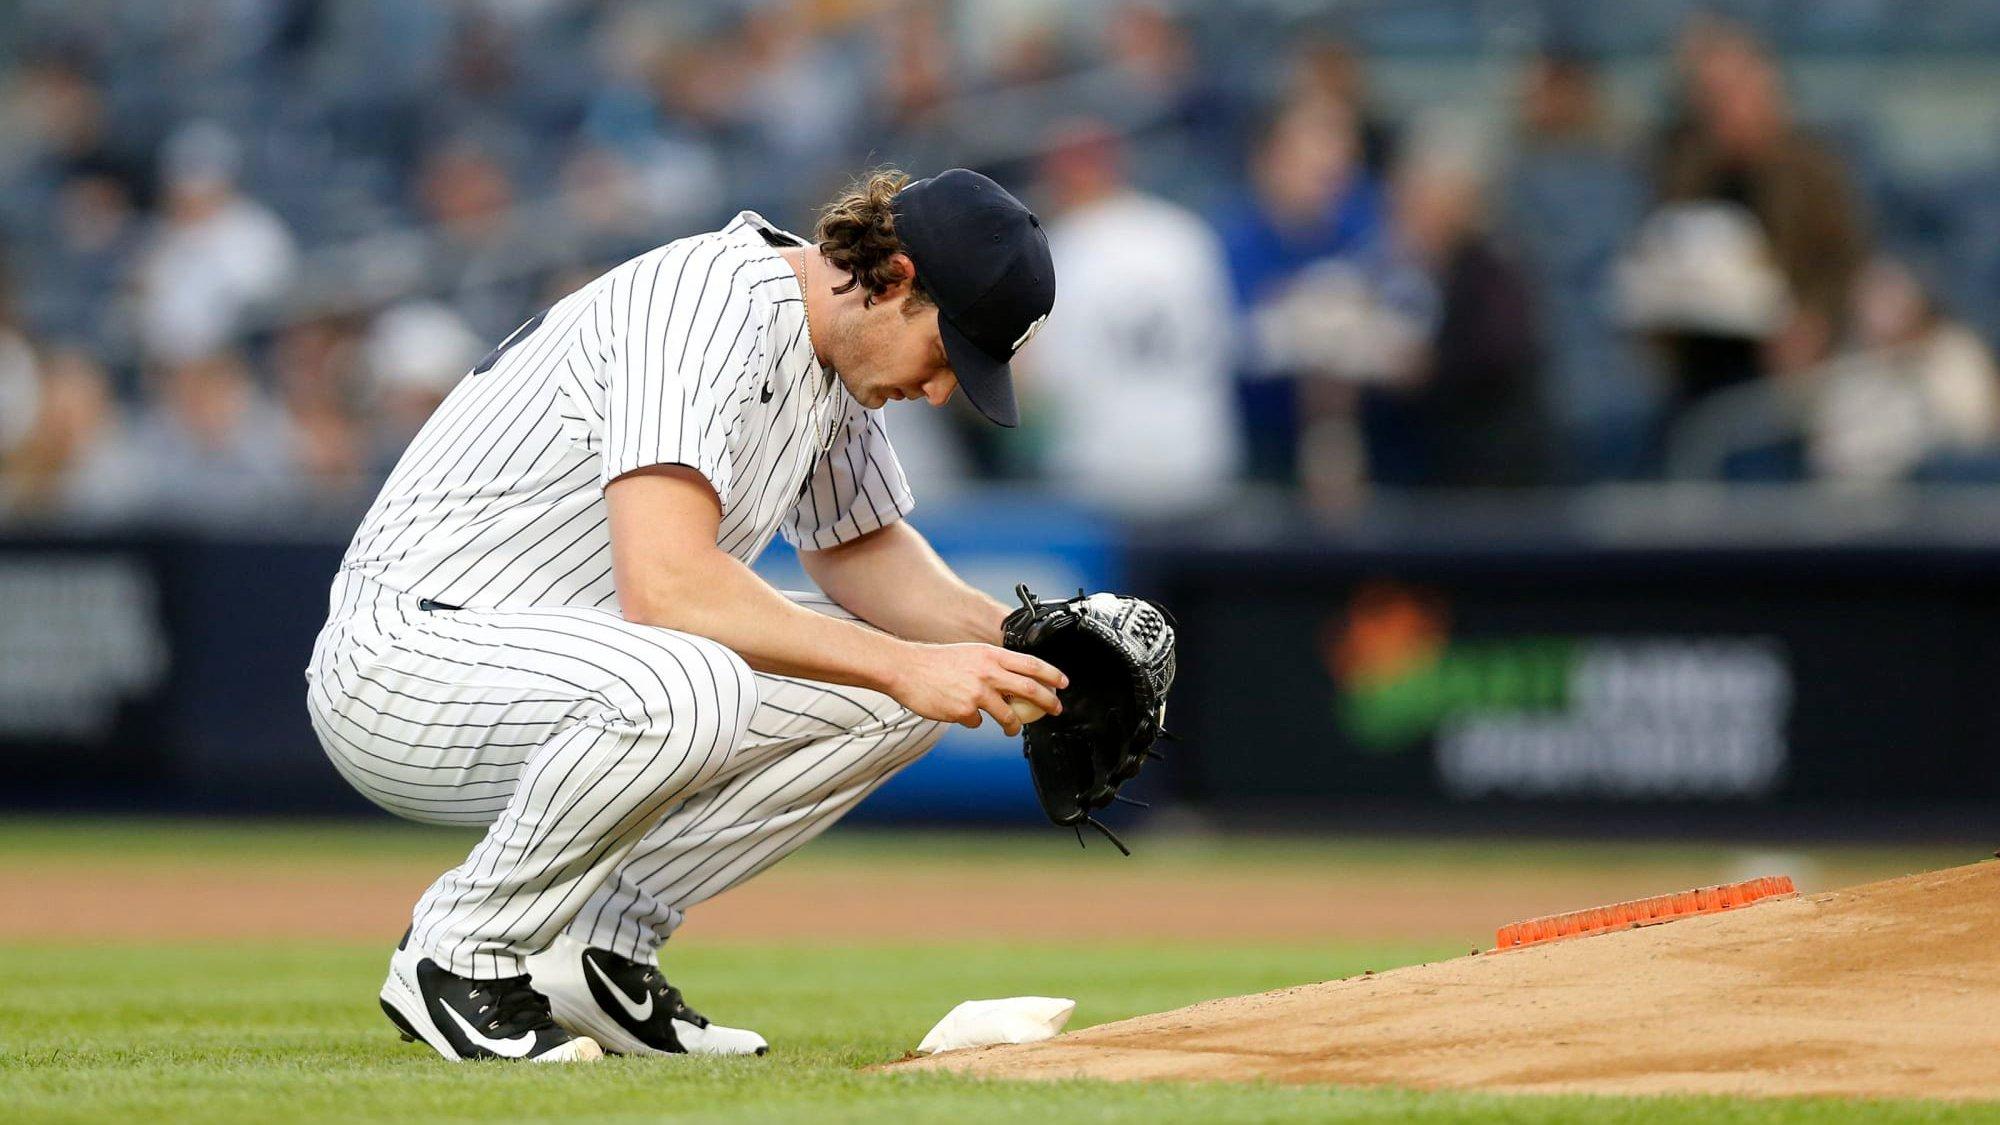 Blue Jays vs. Yankees (August 20): Is another frustrating afternoon ahead for Cole?